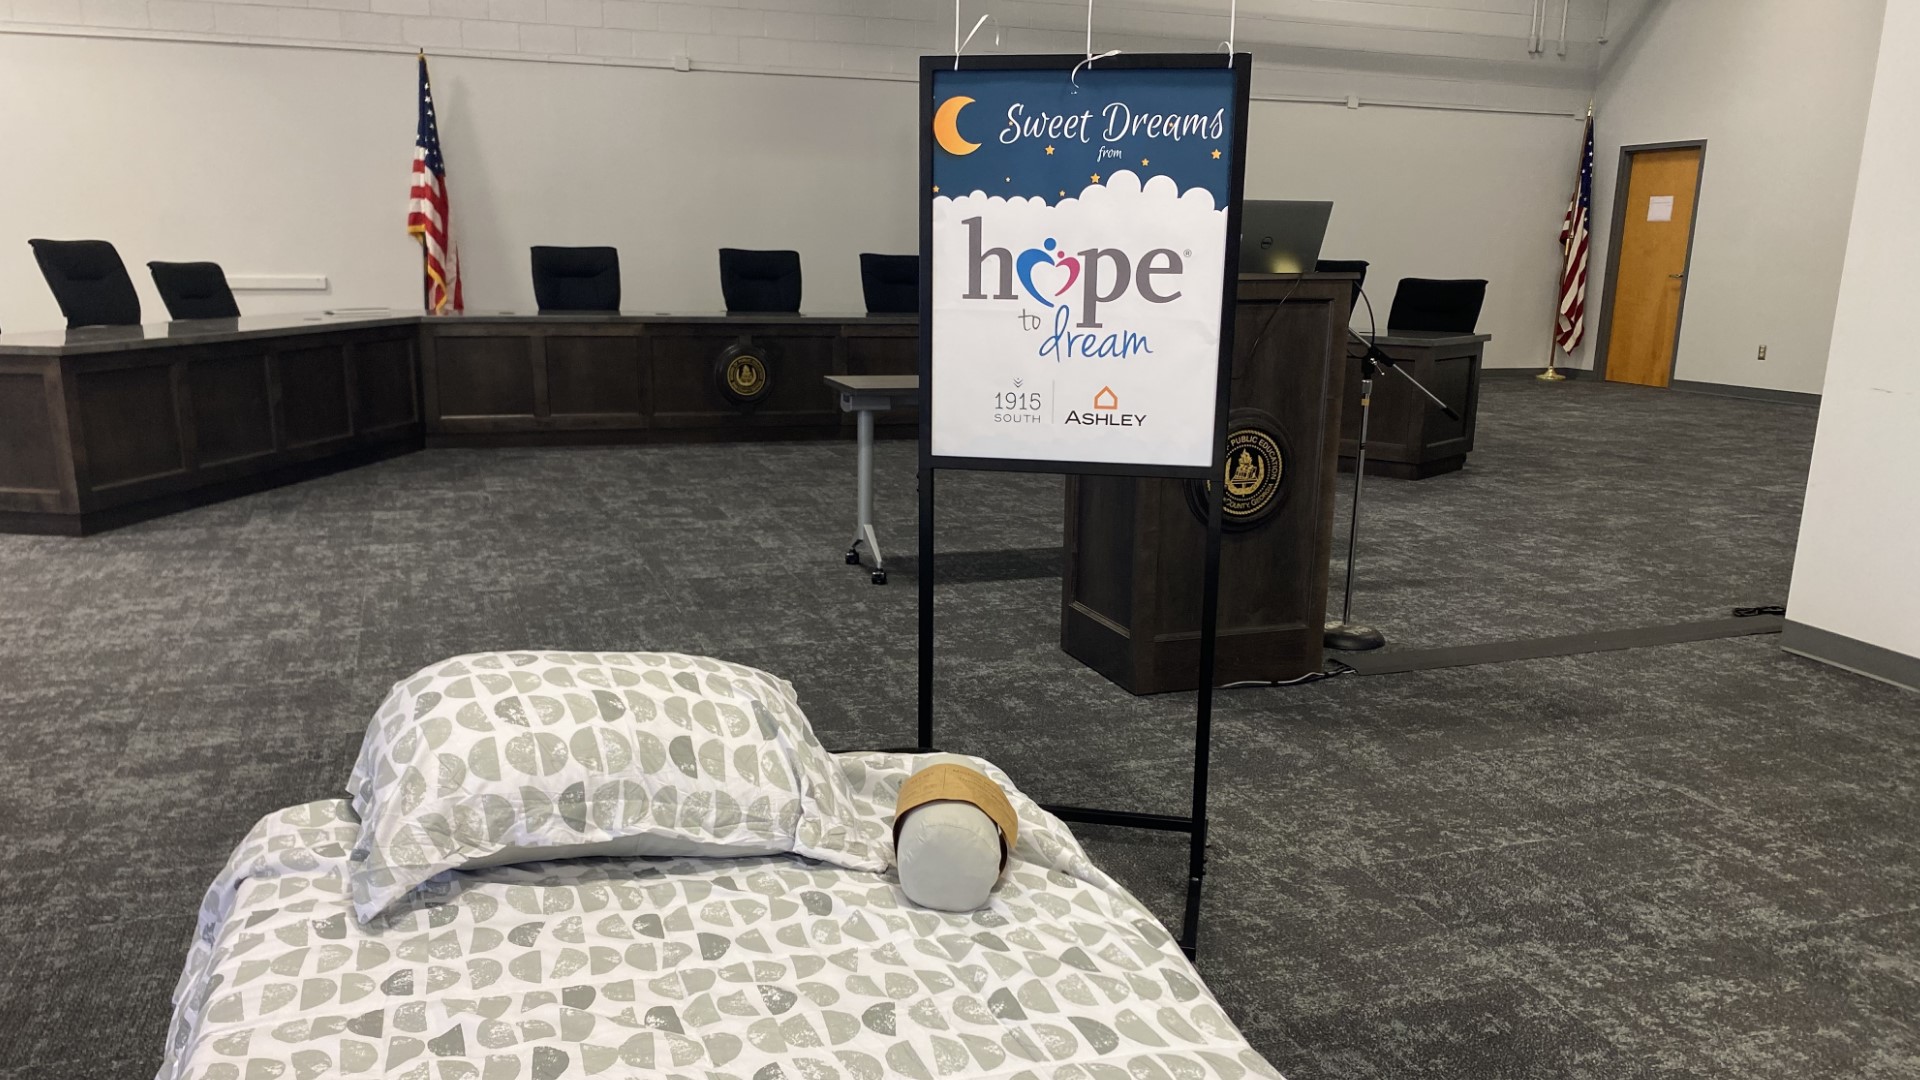 It was all part of their 'Hope to Dream' program, which has been providing children in need with twin mattresses, bed frames, and pillows since 2010.